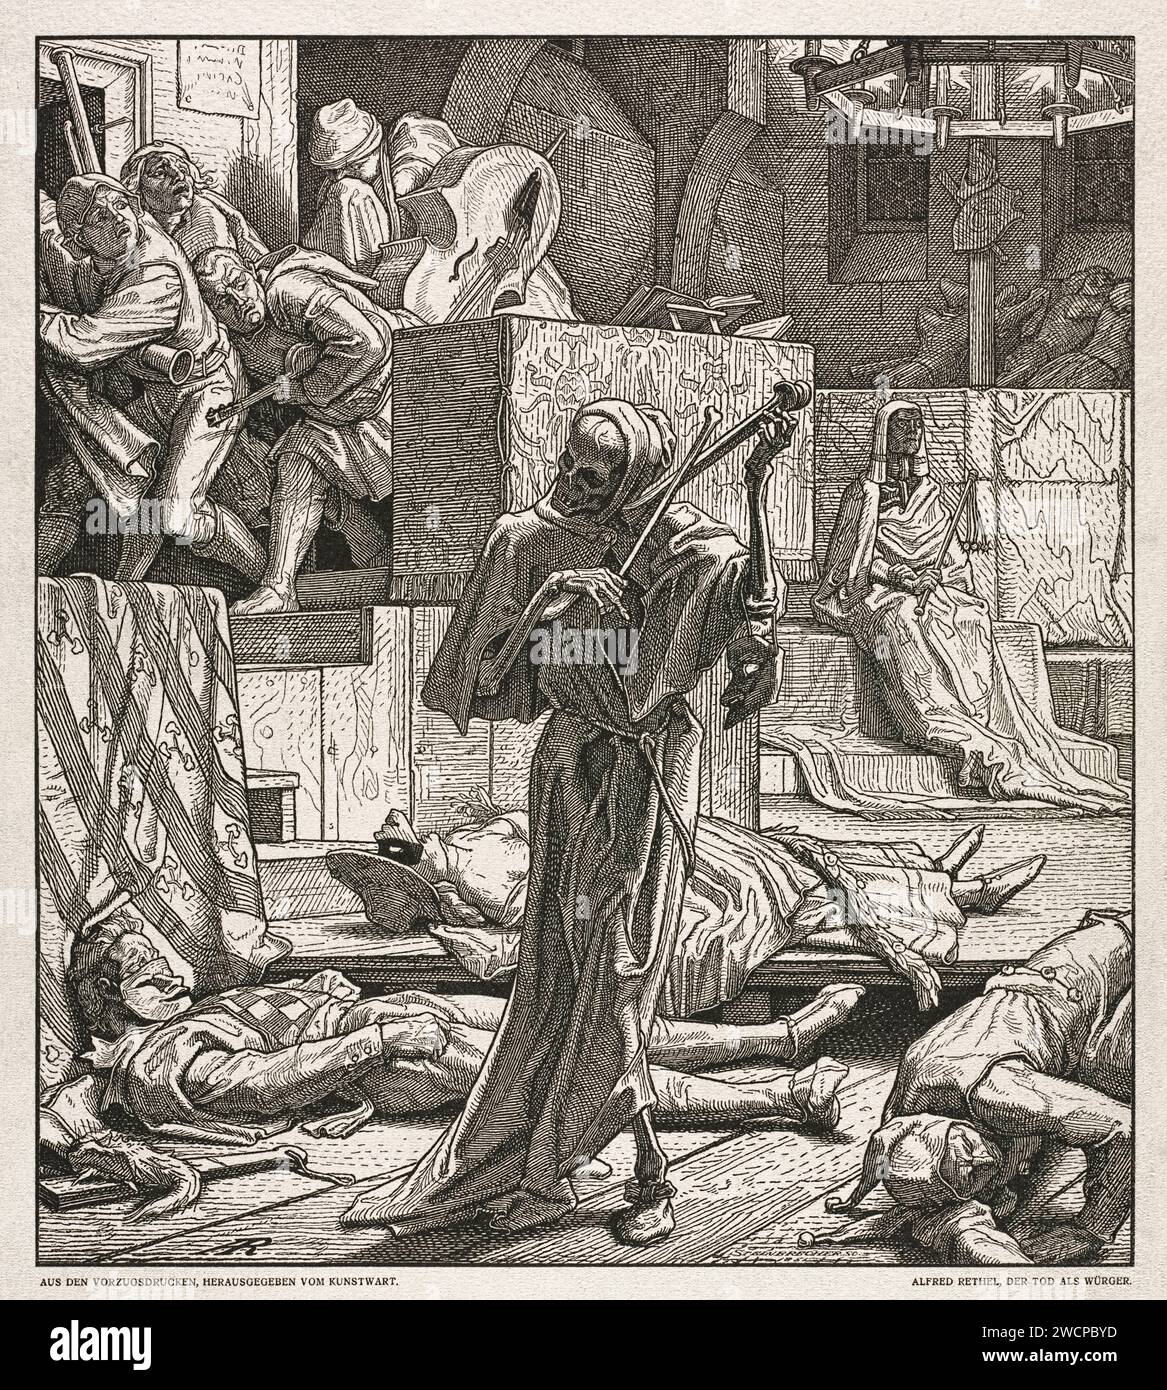 ‘Der Tod als Erwürger’ [Death as Strangler] 1850 woodcut by Alfred Rethel (1816-1859) showing the Death visiting a masked ball in Paris during 1831 where an outbreak of cholera first appeared. Stock Photo